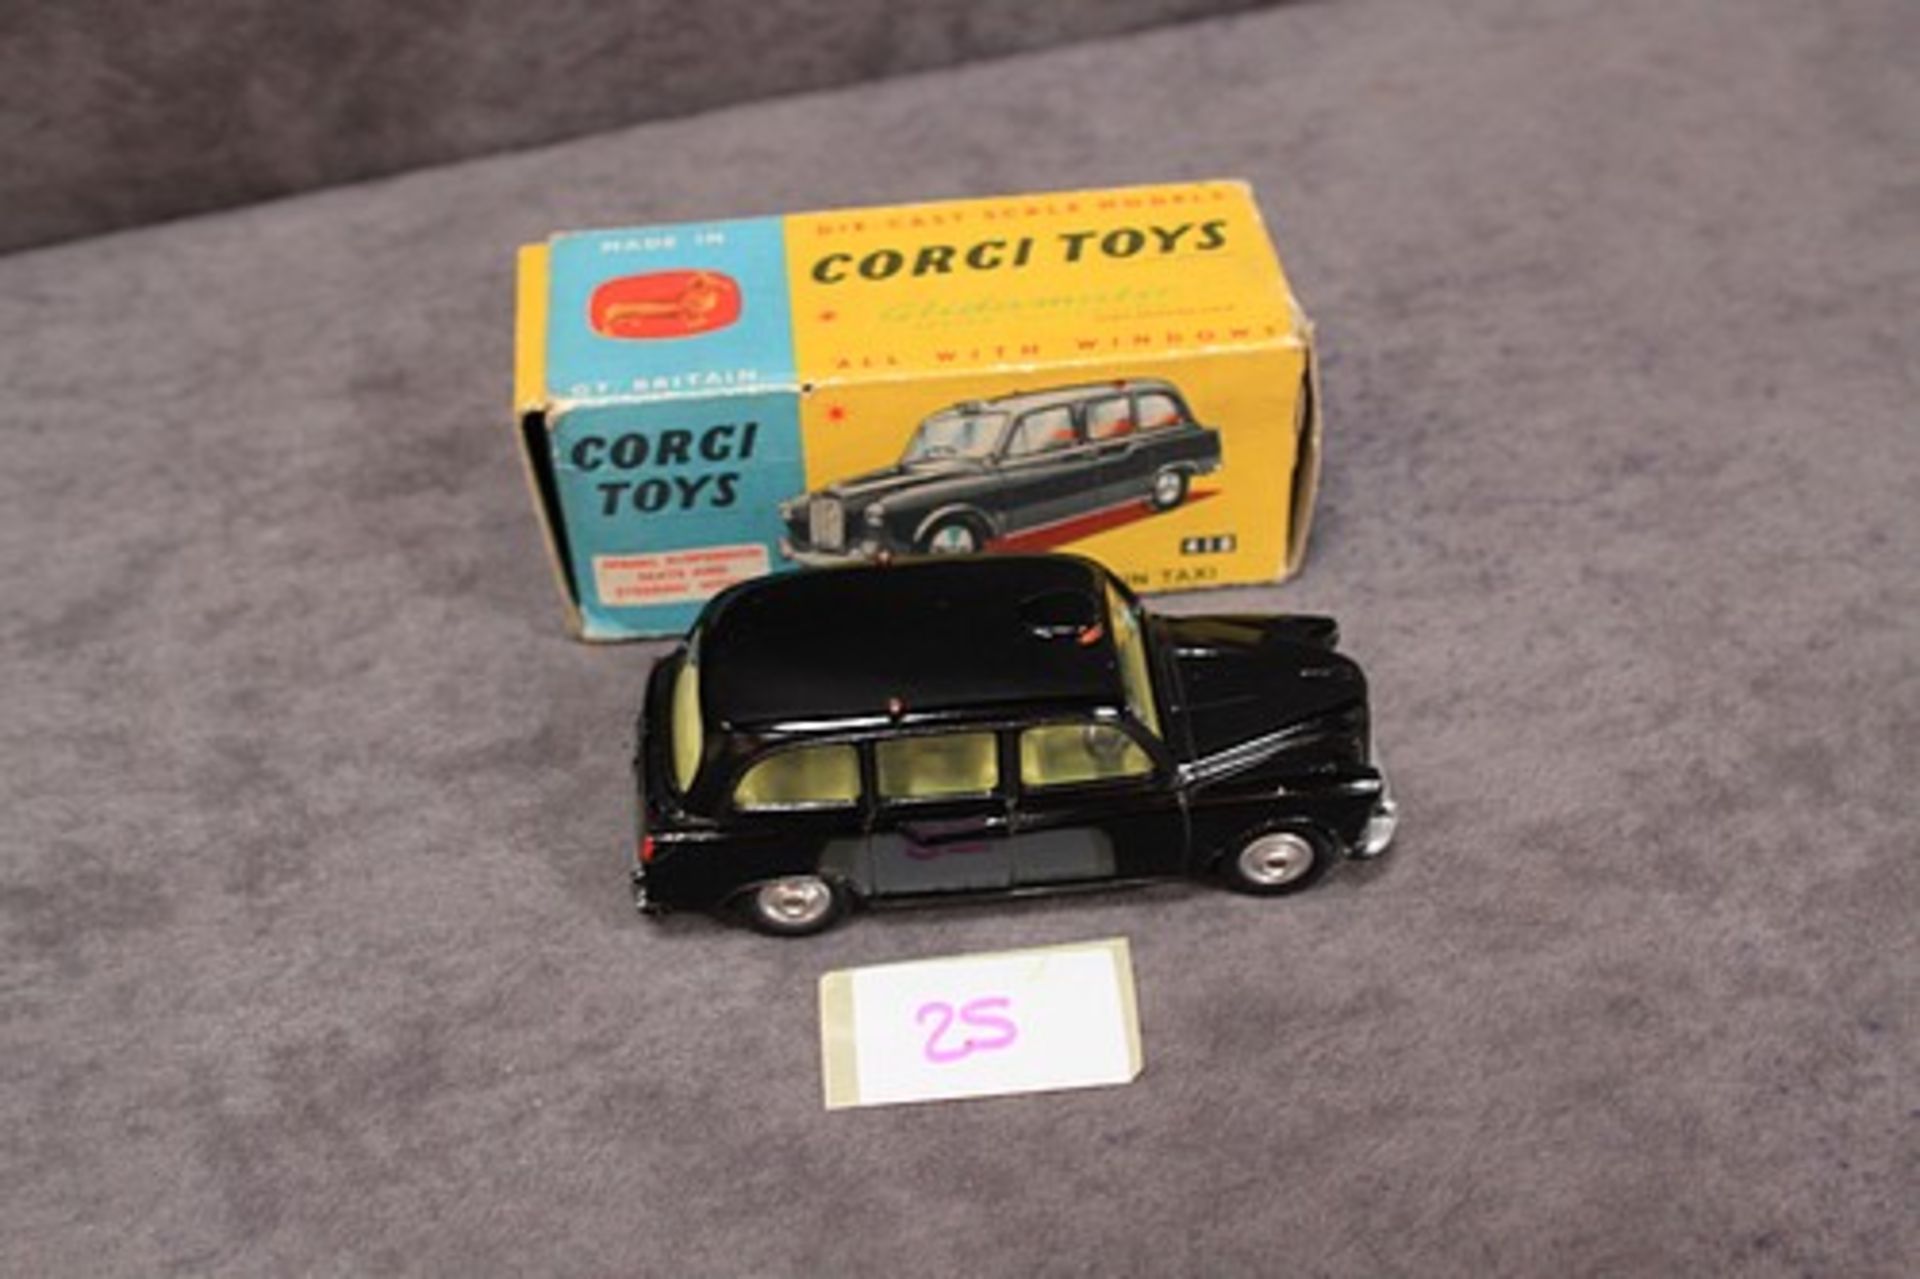 Mint Corgi Toys Diecast #418 Austin Taxi in a good box (taped one end) No driver - Image 2 of 2